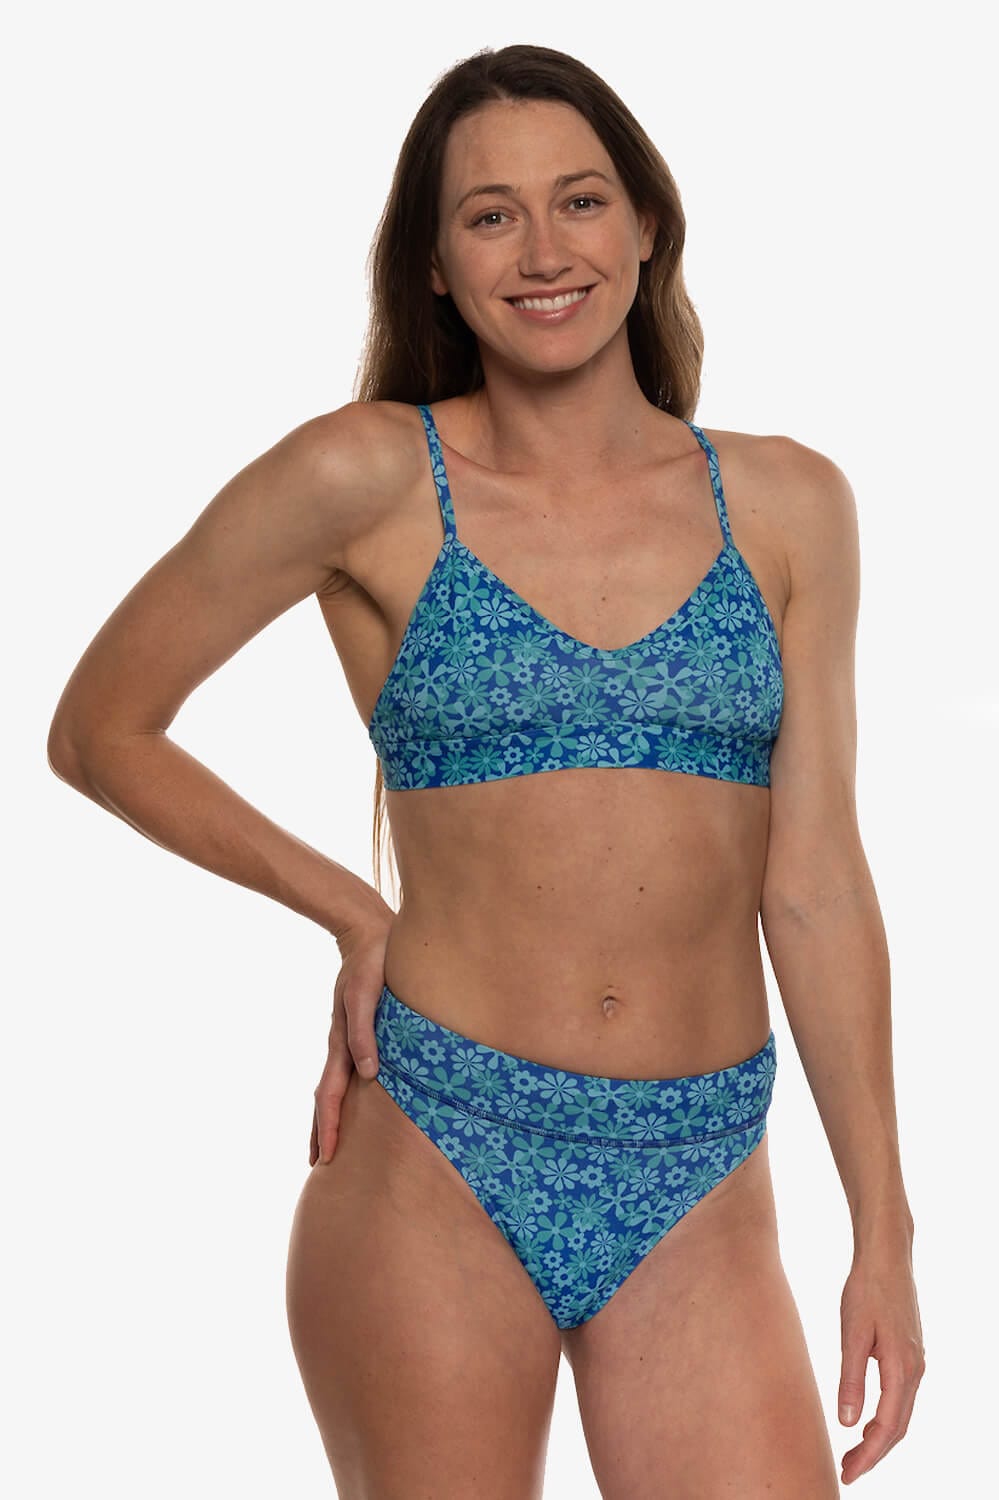 Shop Best-selling Women's Bathing Suits and Athletic Bikinis – JOLYN